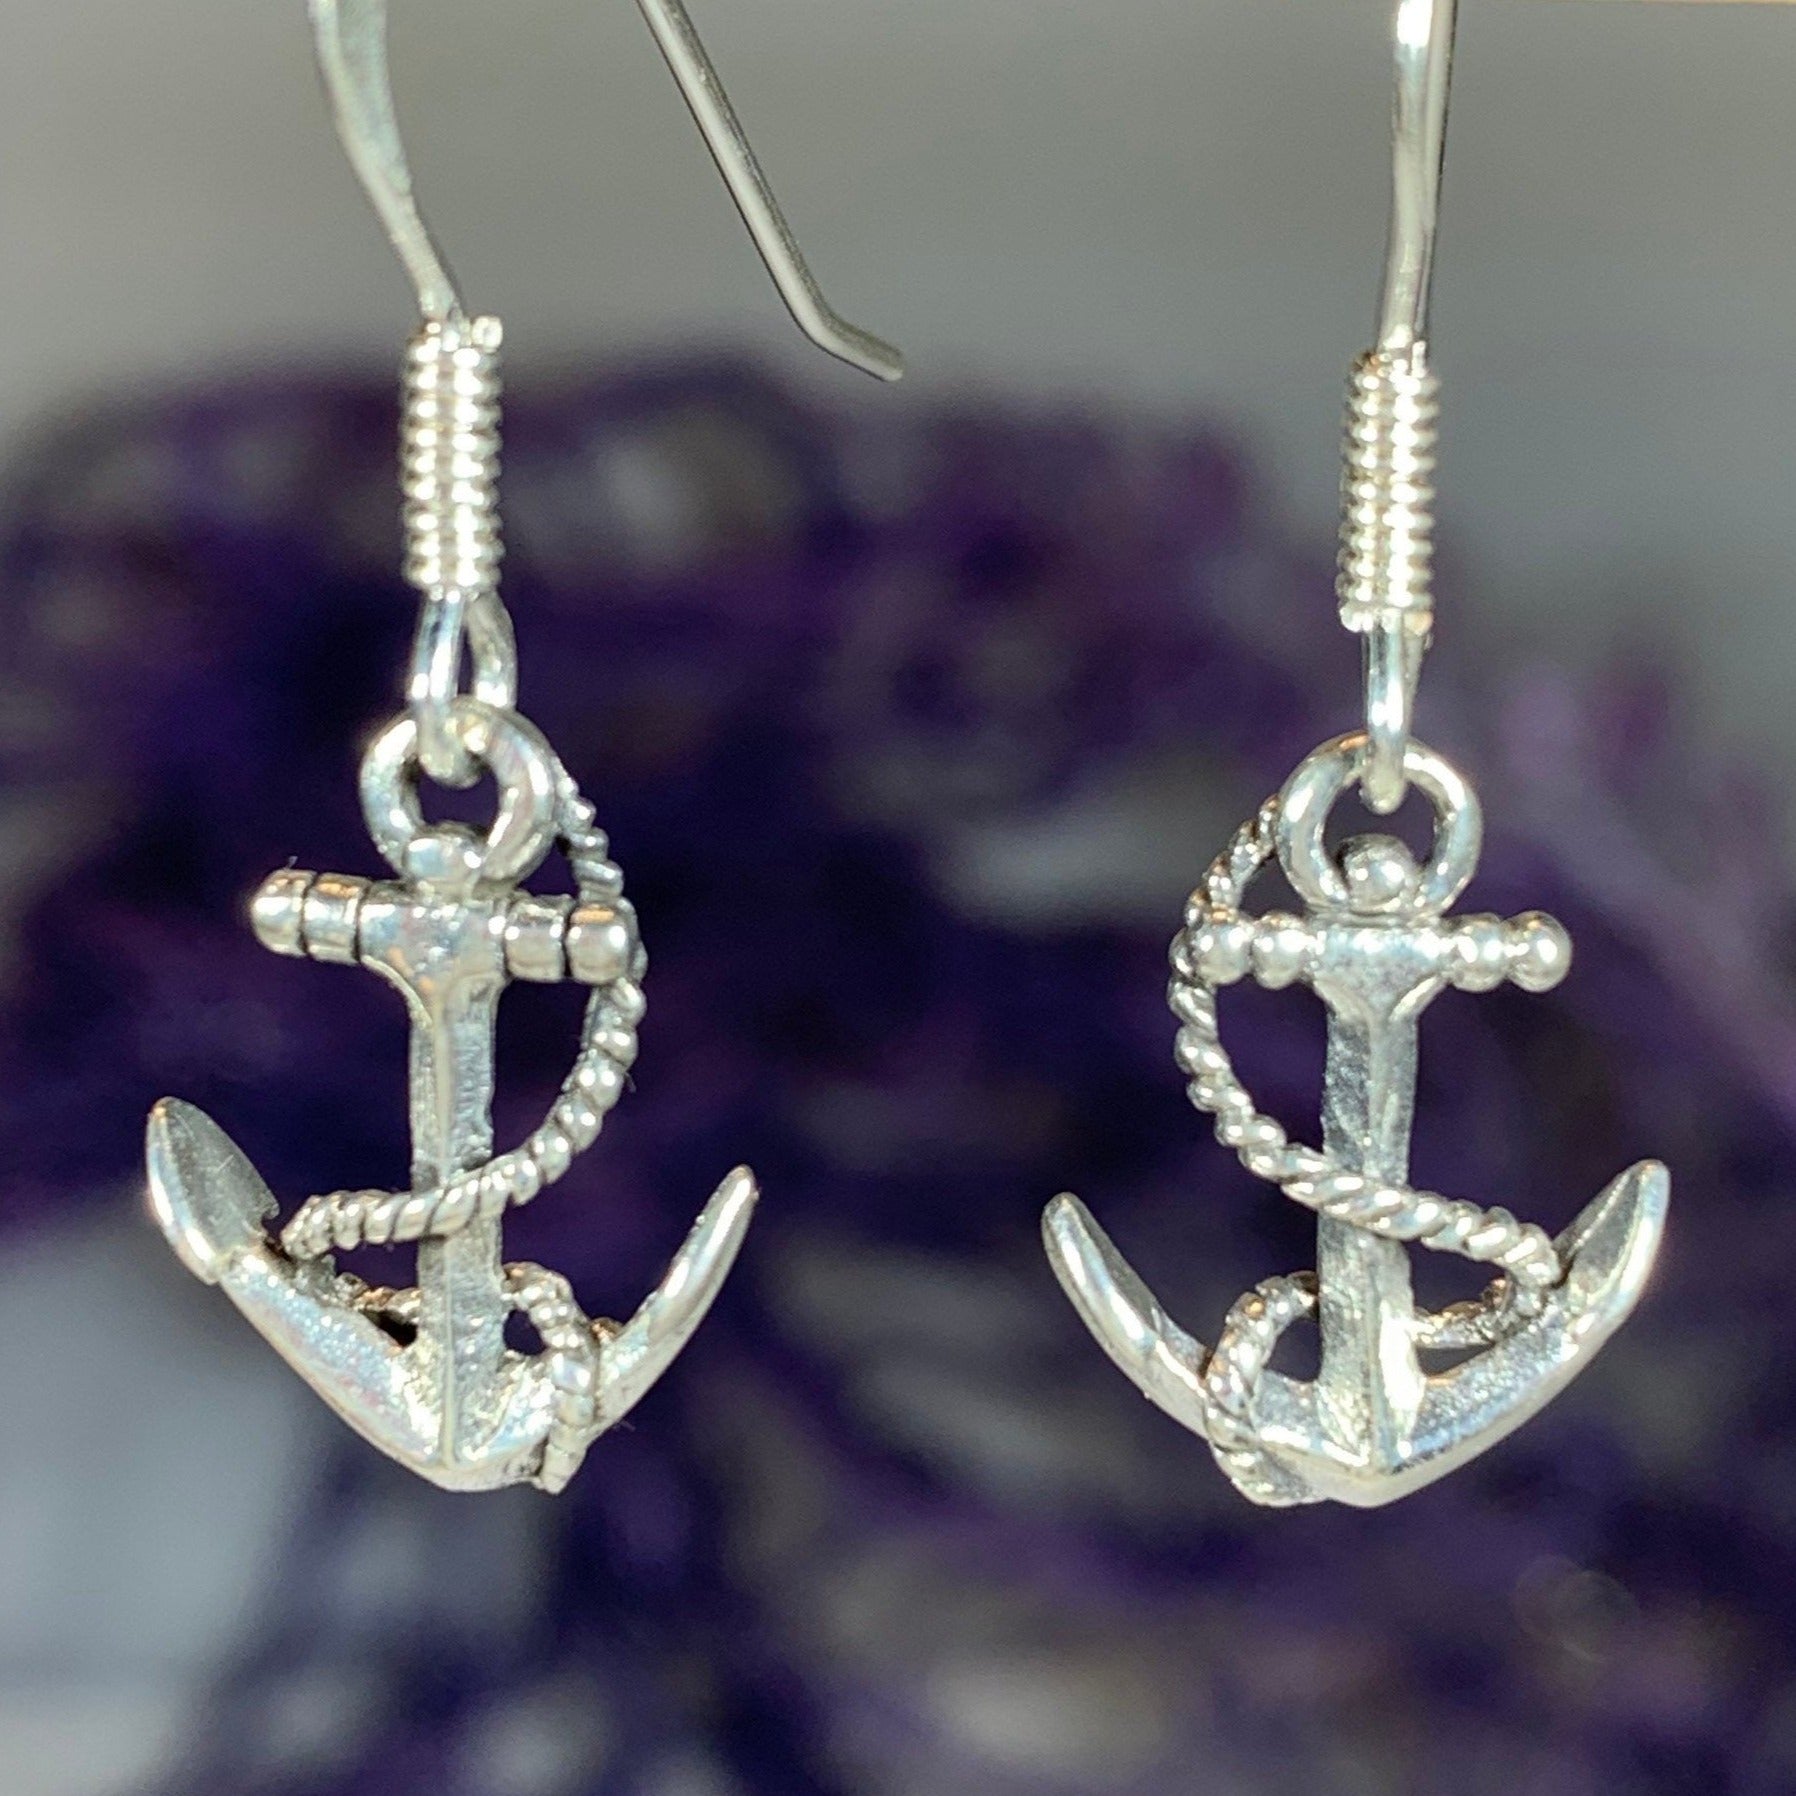 Petite Anchor SIlver Earrings – Celtic Crystal Design Jewelry